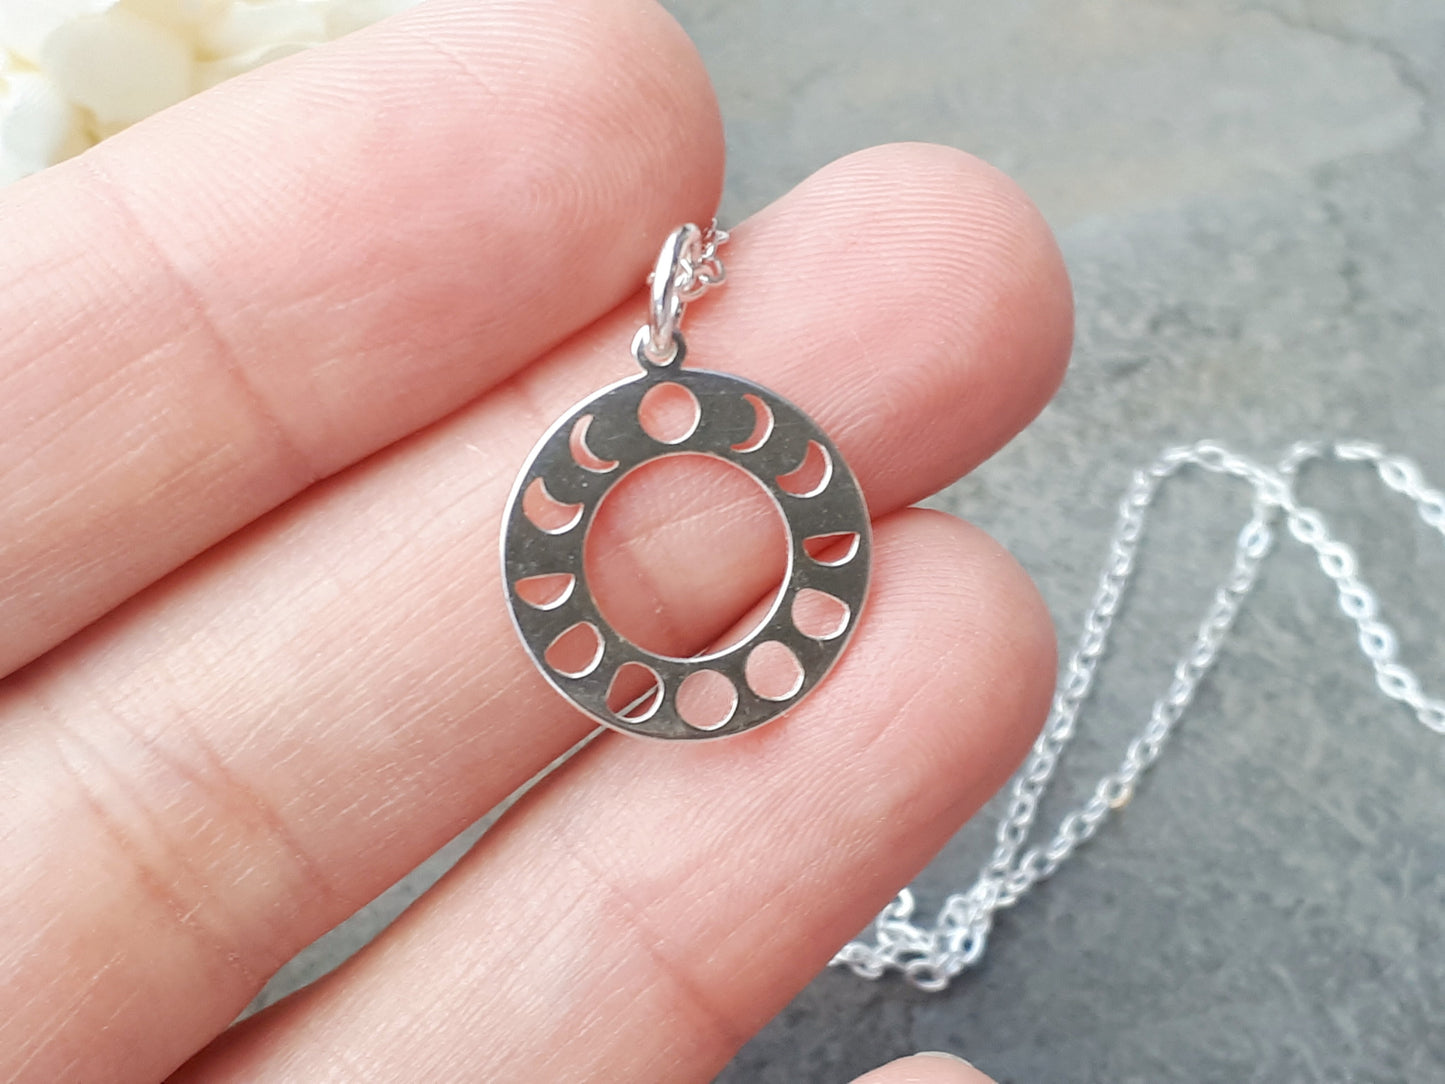 Moon phase necklace in sterling silver.